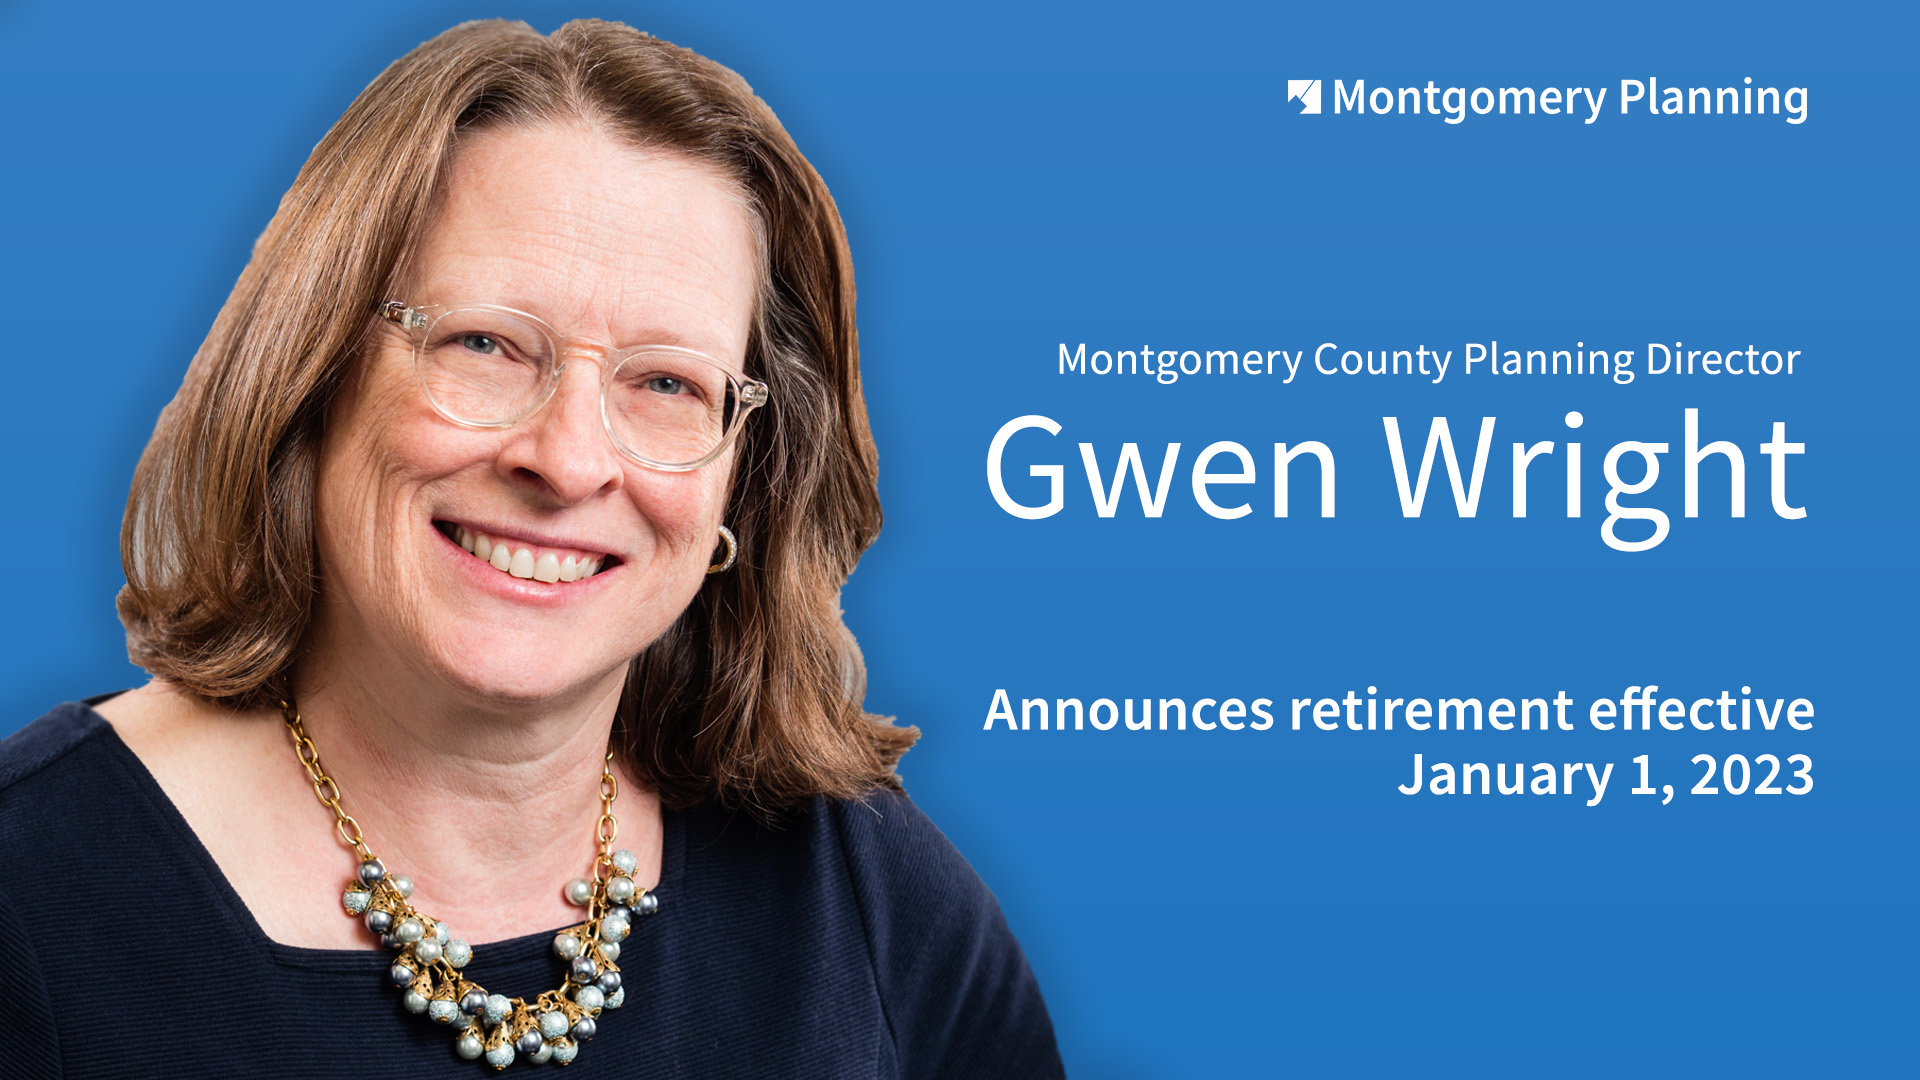 Montgomery Planning Director Gwen Wright announces retirement as of January 1, 2023